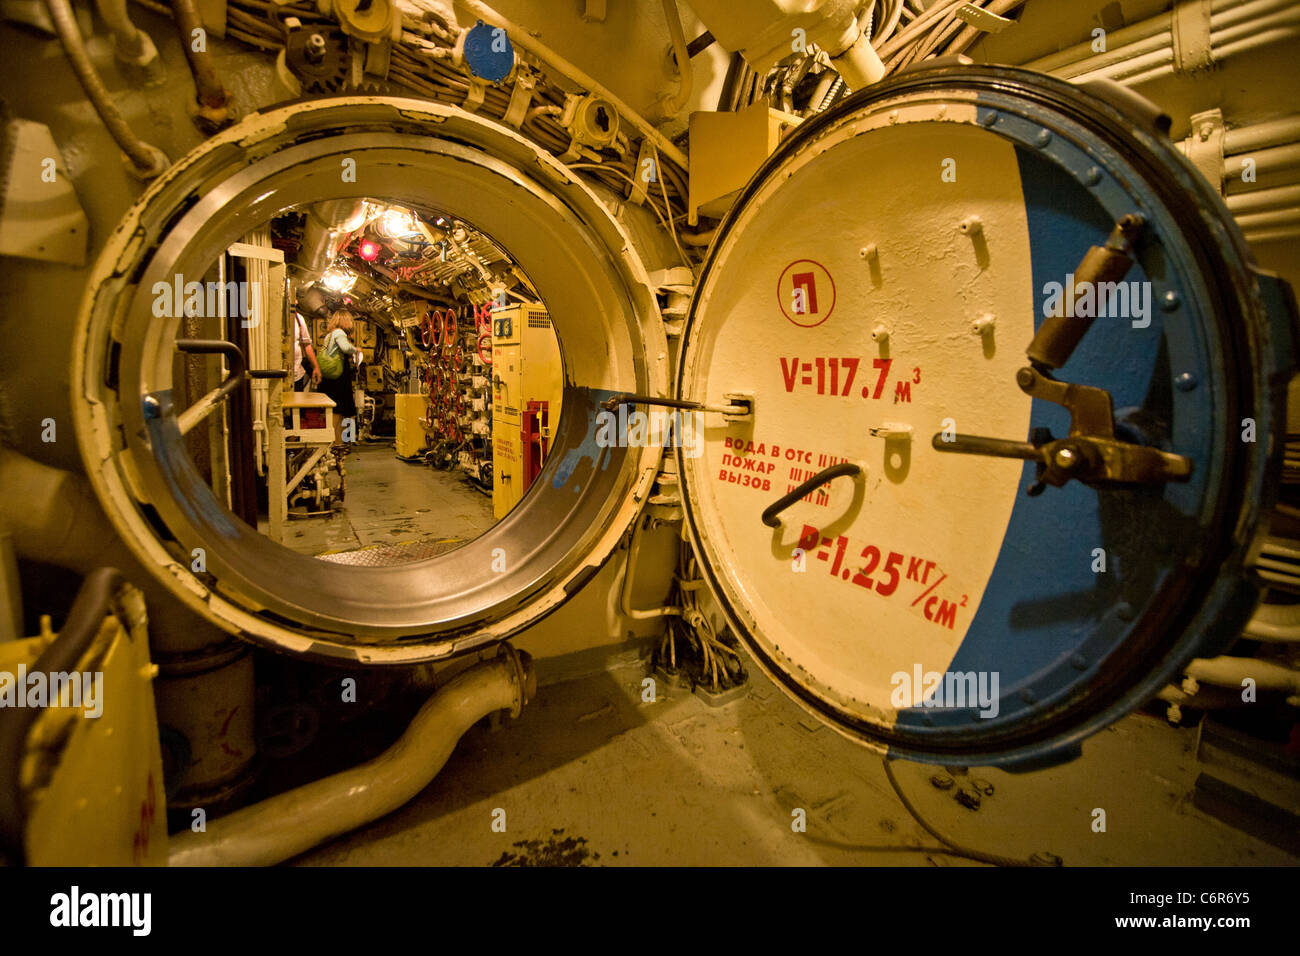 An Open Watertight Door Of The Soviet Diesel-Electric Attack Submarine B-39  Gives Access To The Vessel's Control Room Stock Photo - Alamy